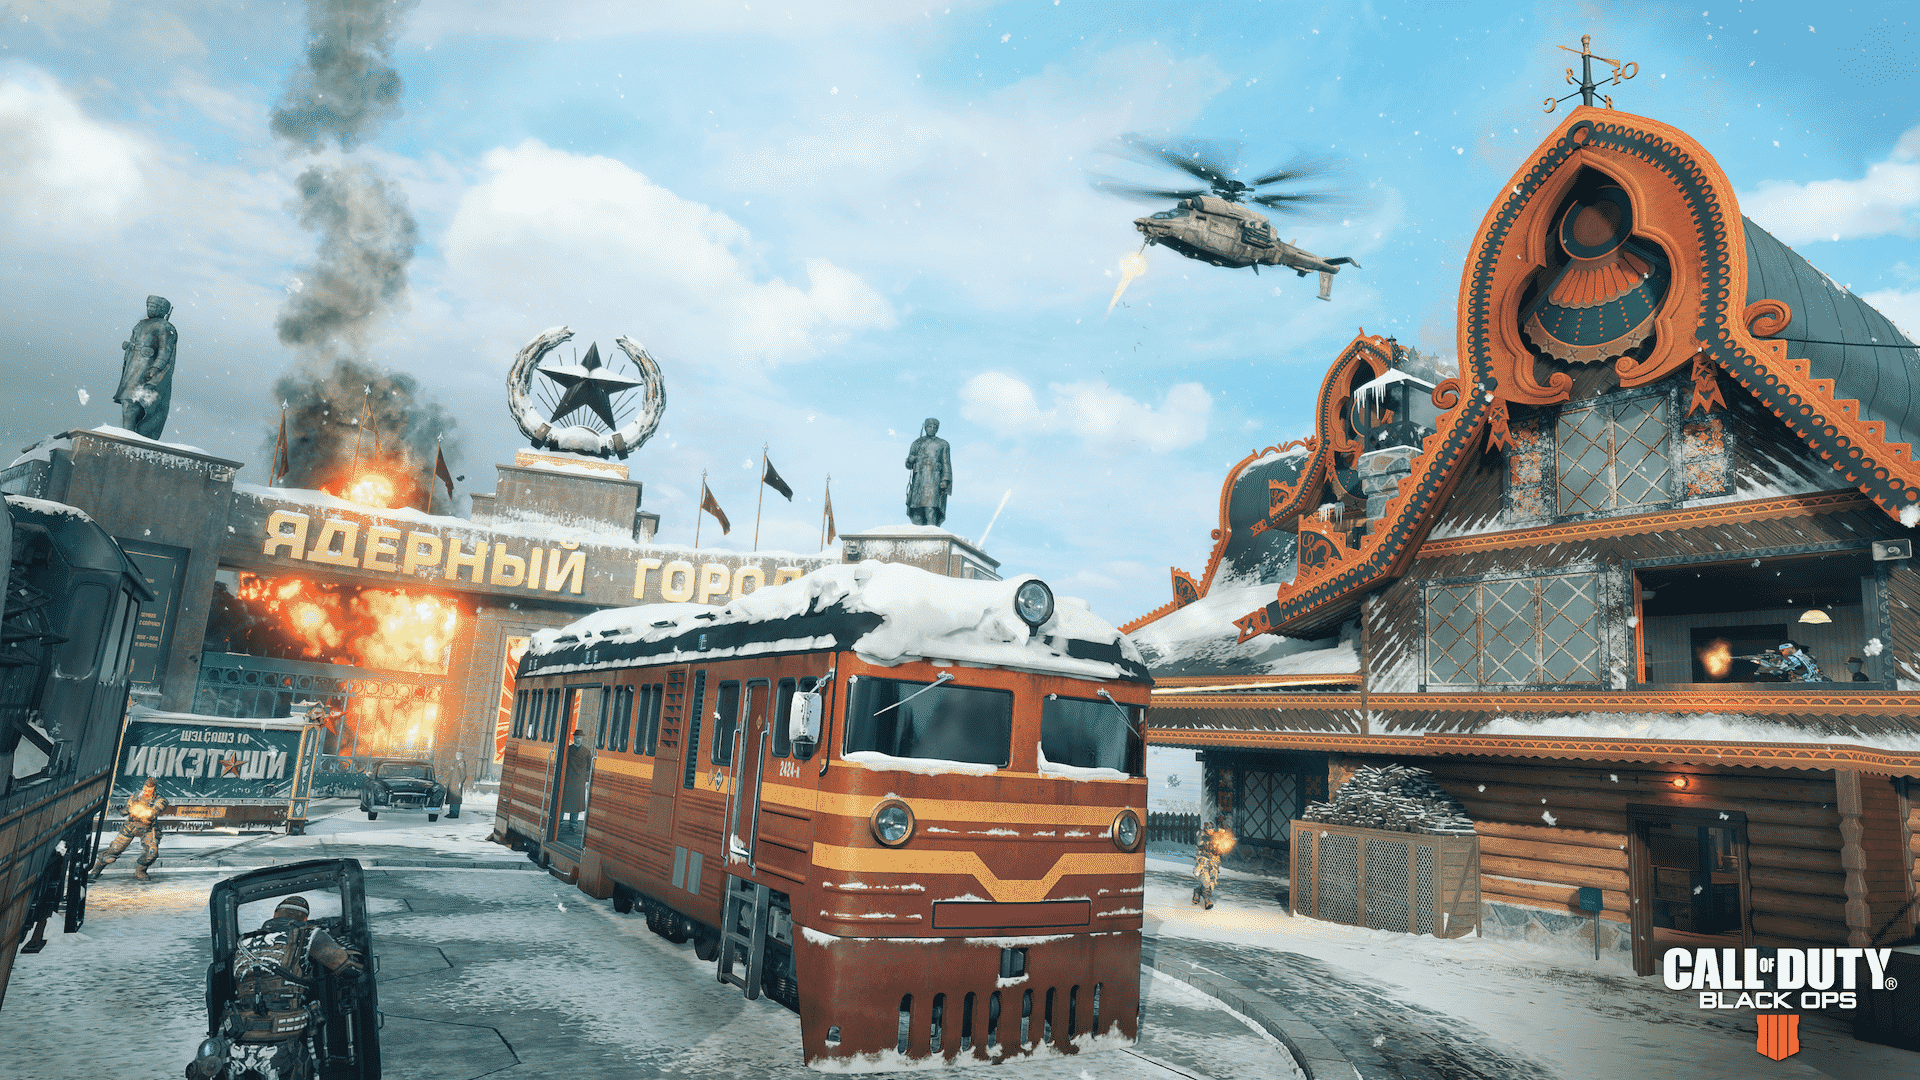 Russian version of Nuketown featured in Black Ops 4.